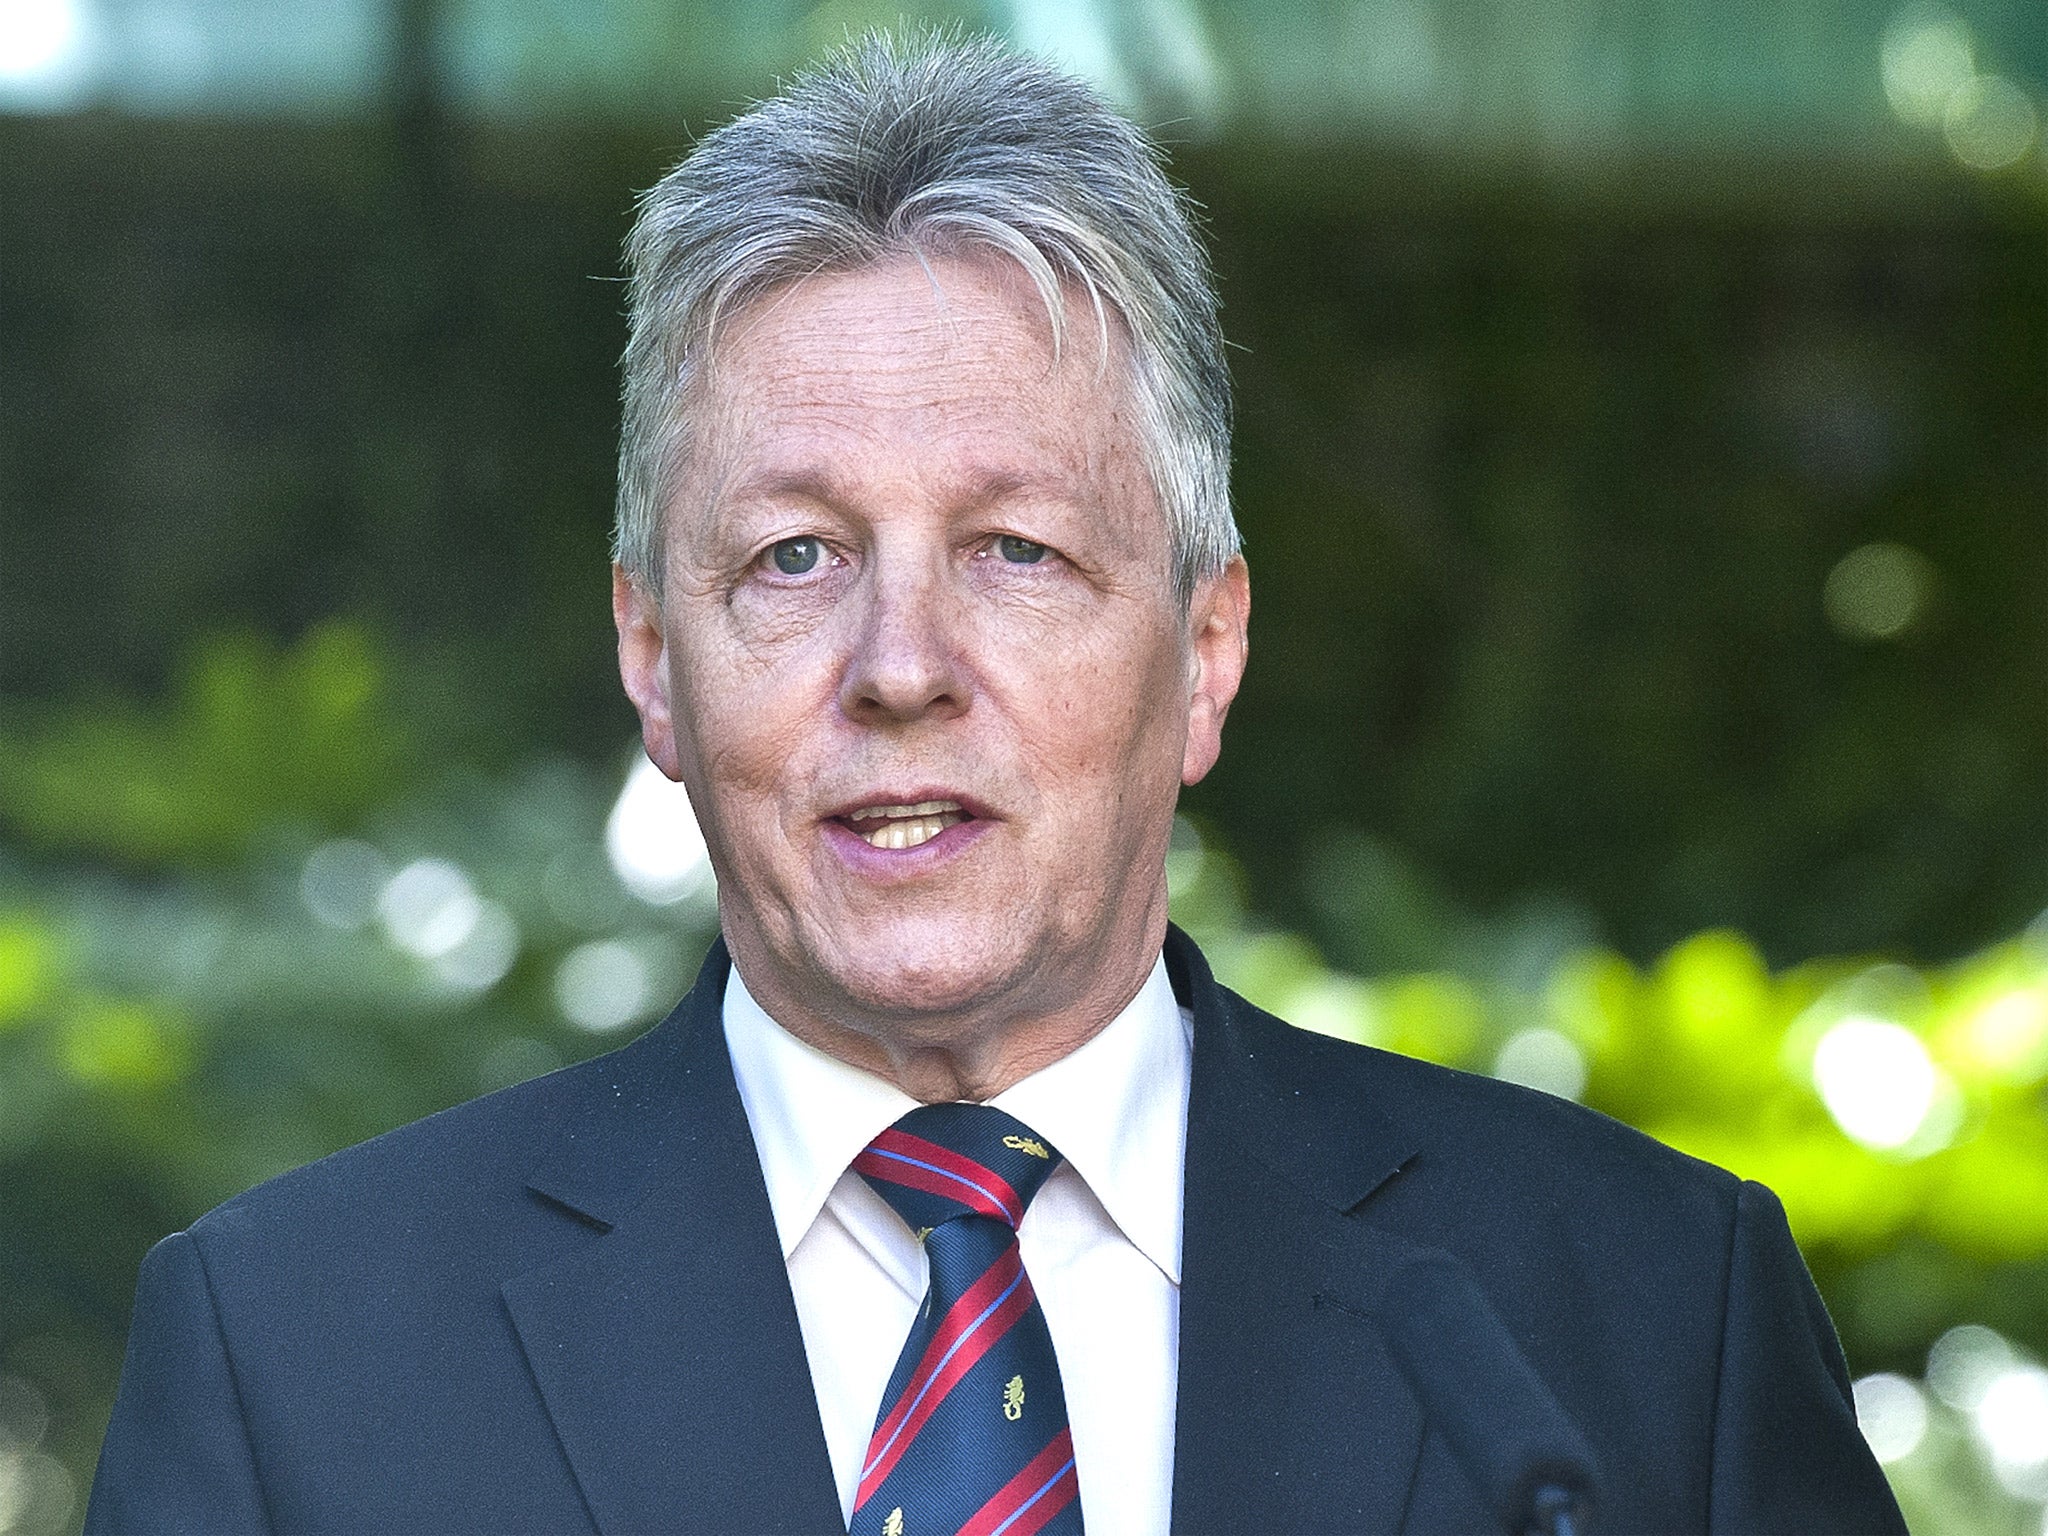 Peter Robinson is believed to be undergoing tests for a heart-related illness